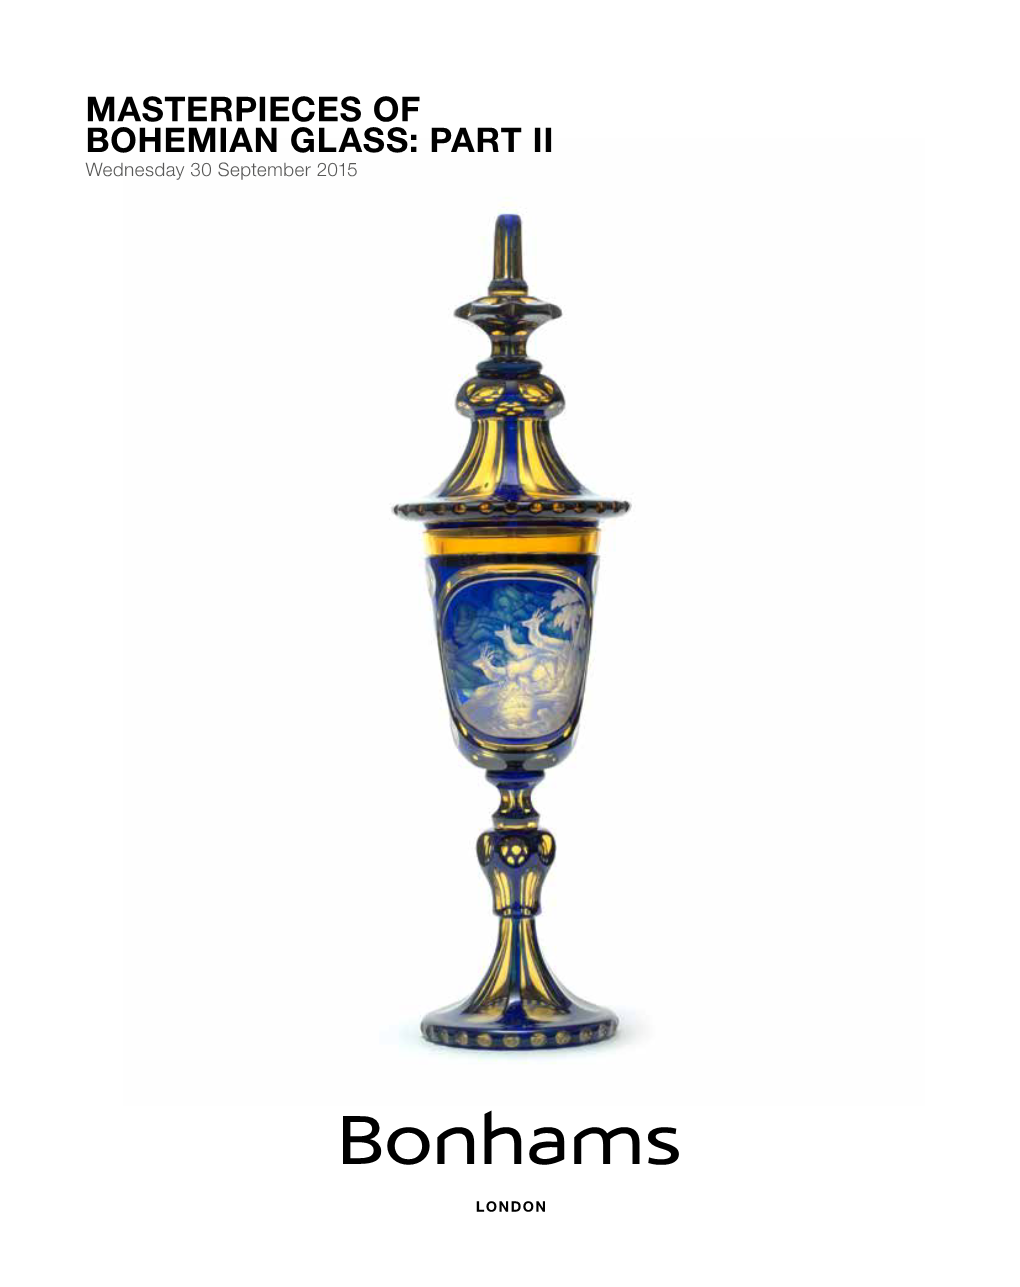 Masterpieces of Bohemian Glass